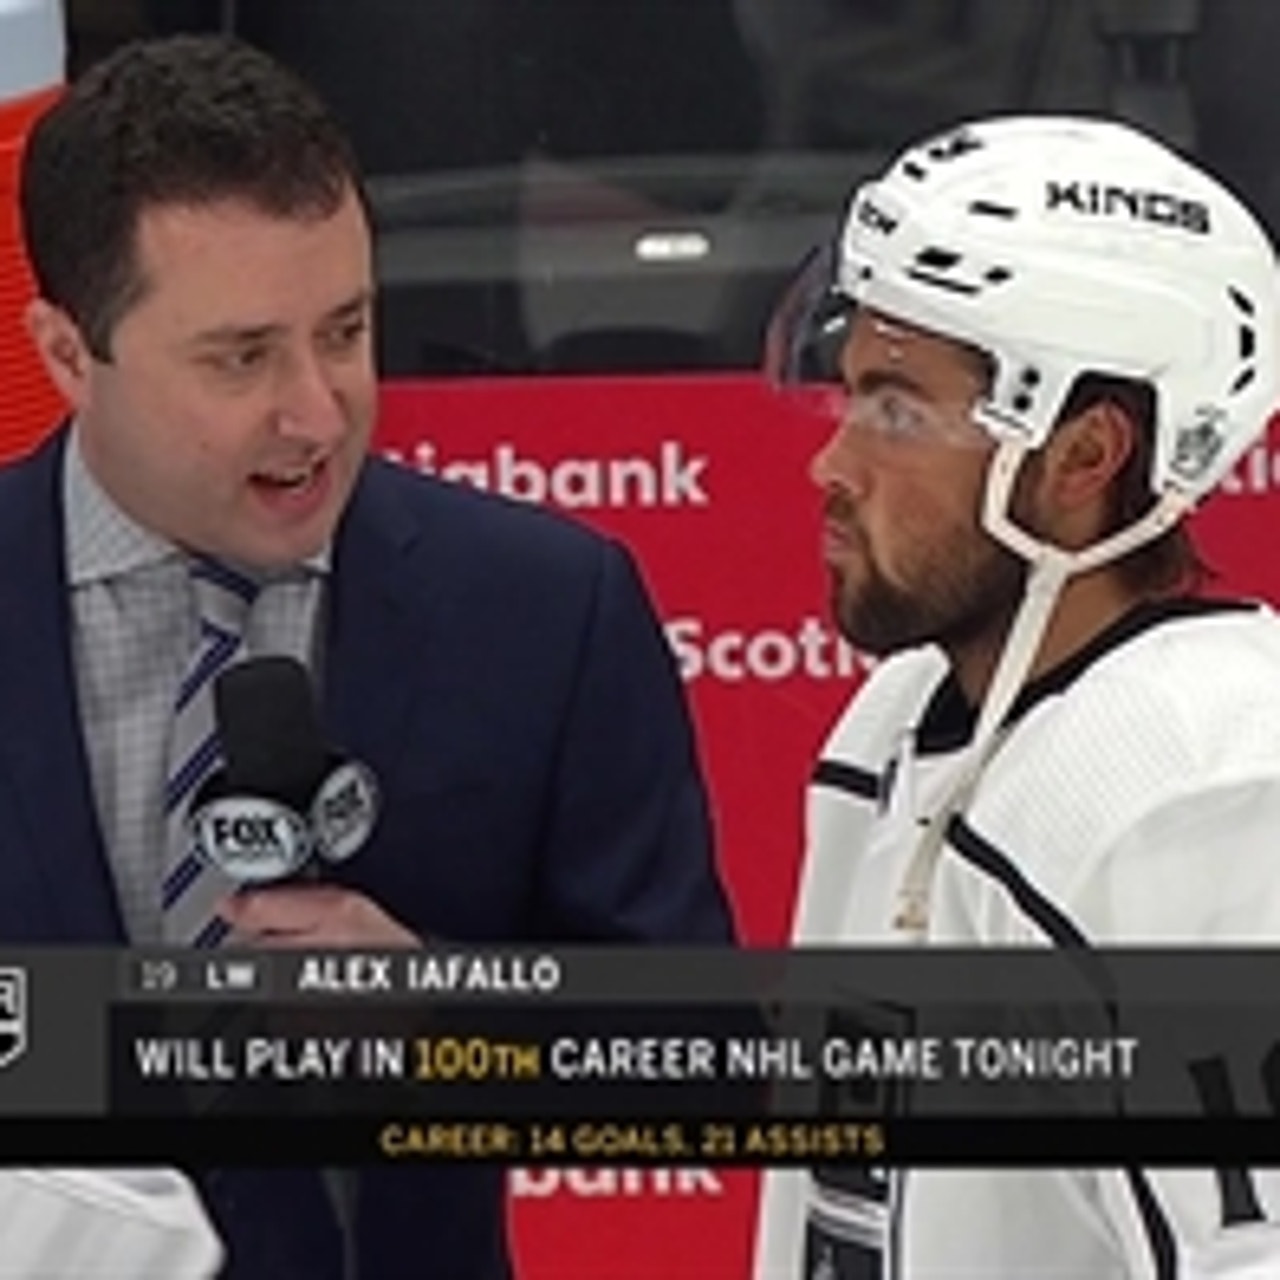 Alex Iafallo talks about playing in his 100th NHL game against the Edmonton Oilers FOX Sports